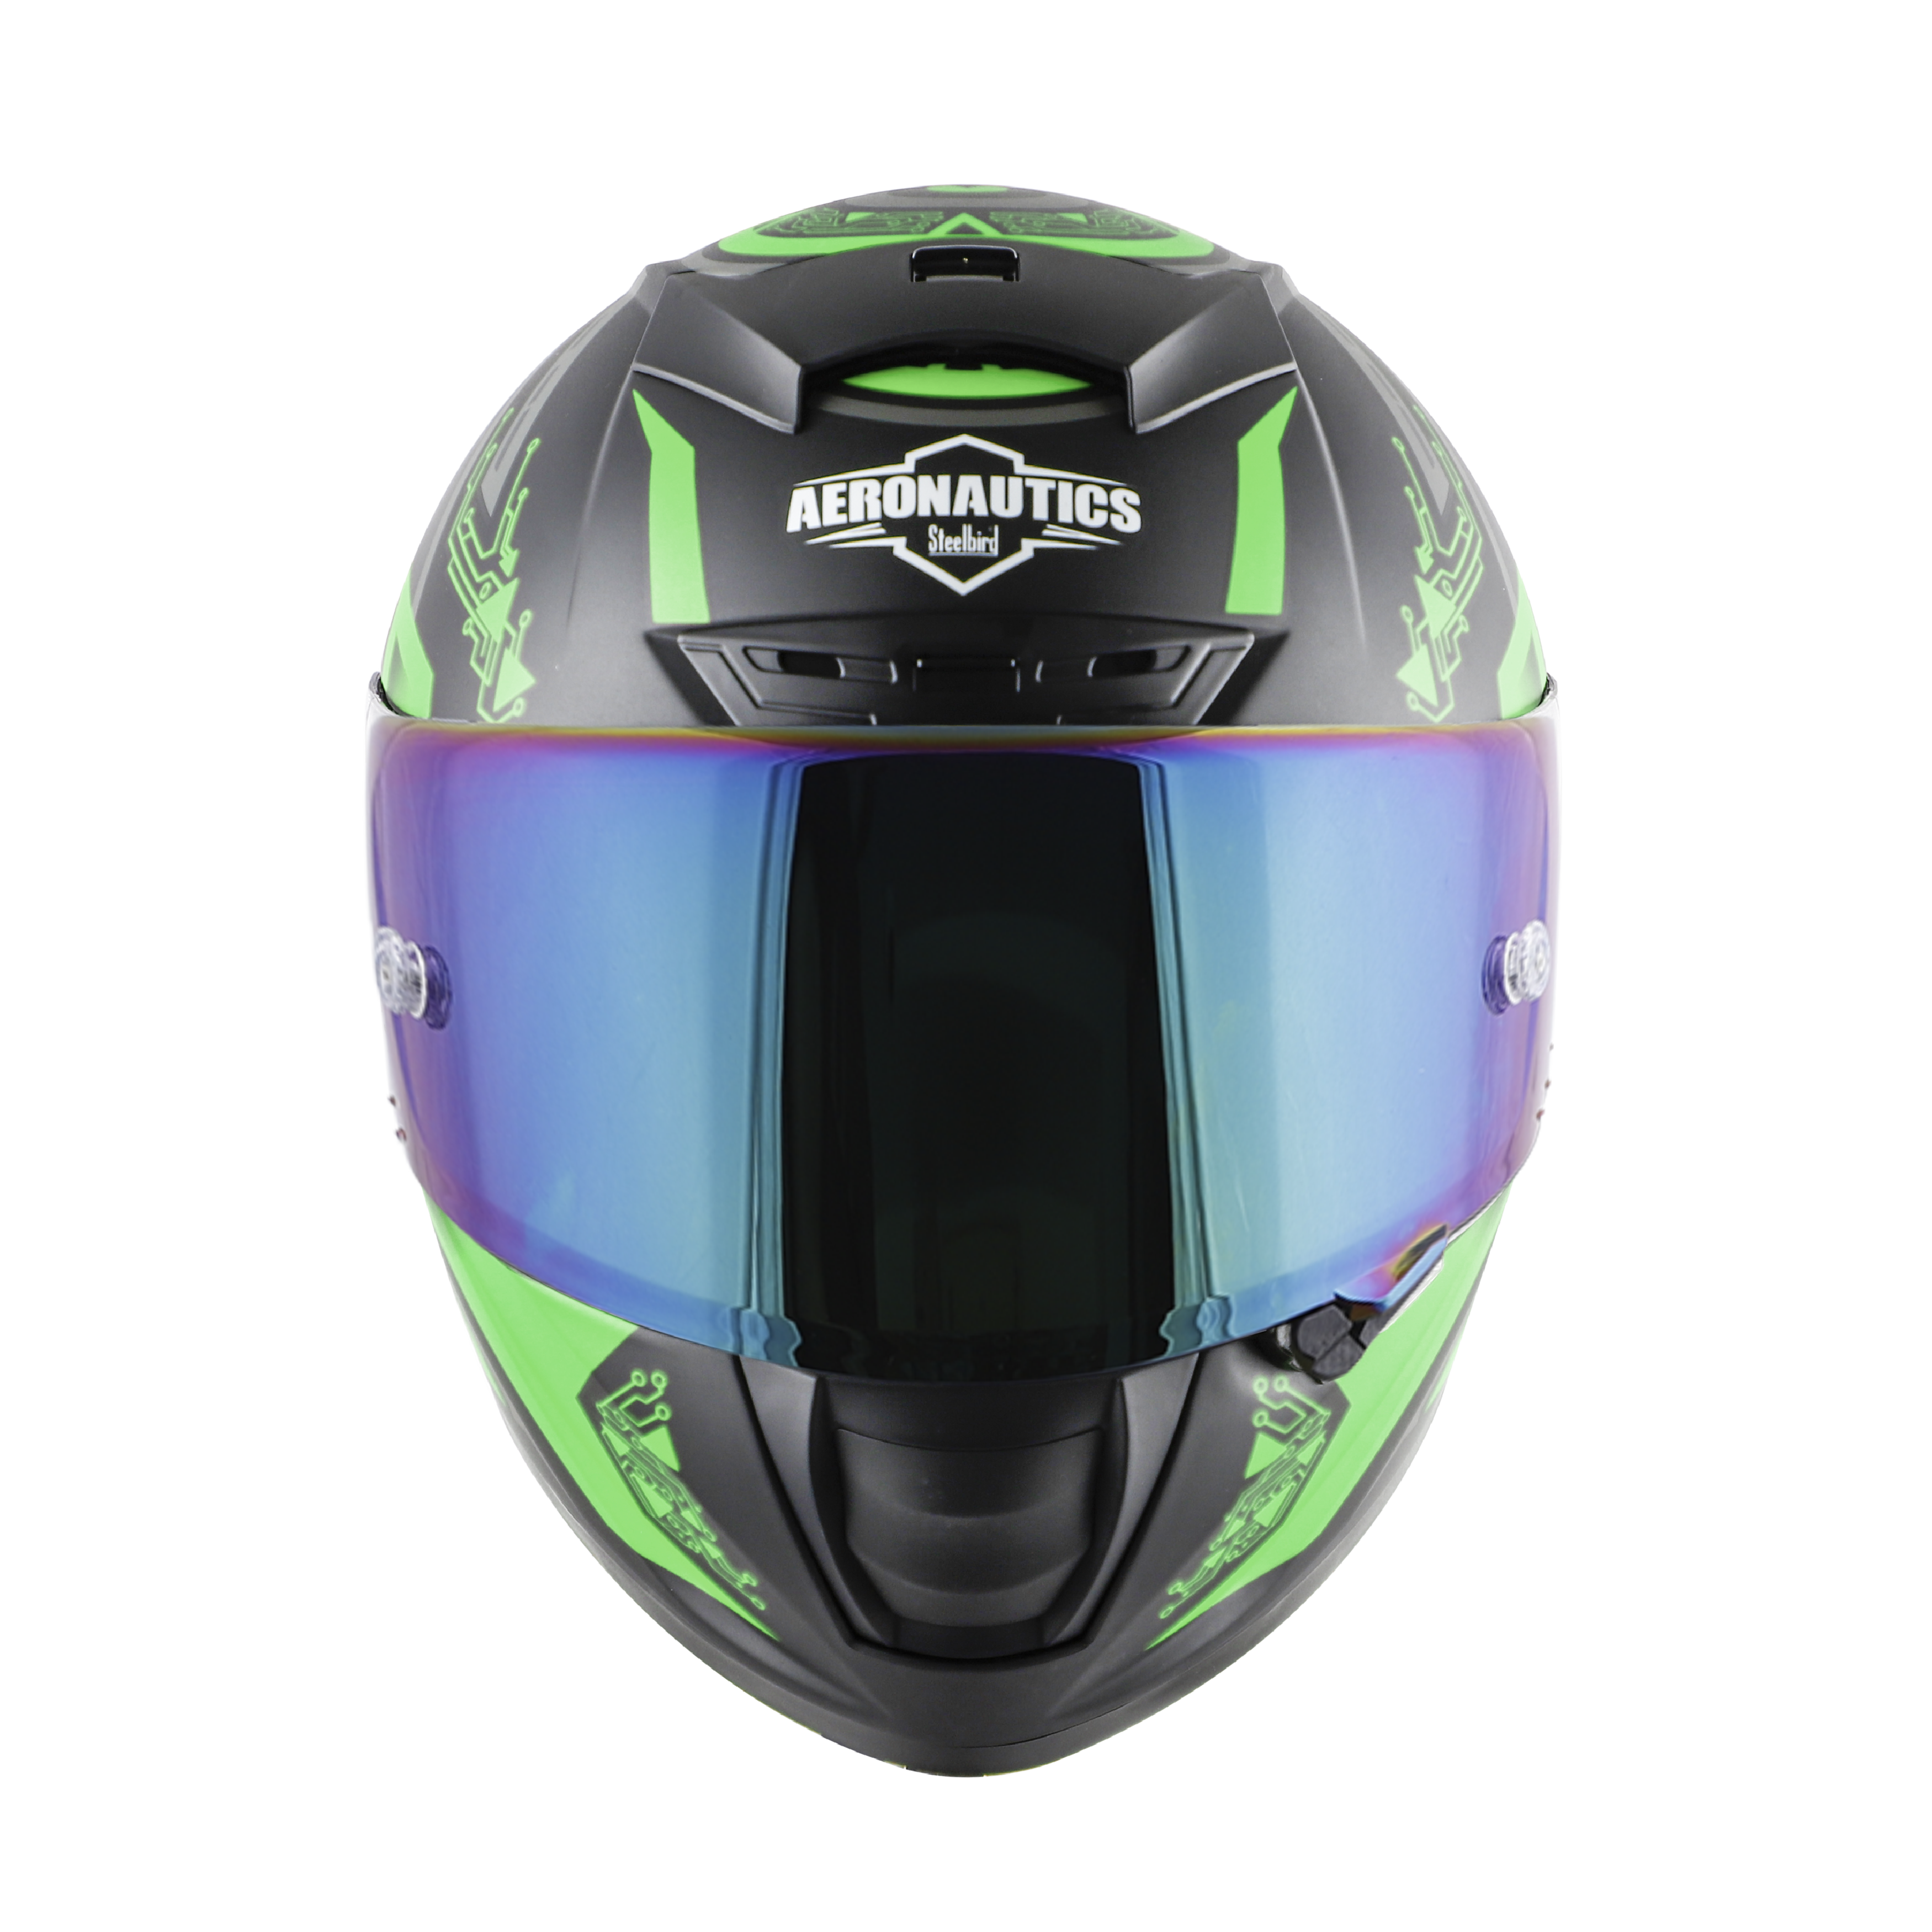 SA-2 ELECTRIC MAT BLACK WITH GREEN (FITTED WITH CLEAR VISOR EXTRA RAINBOW CHROME VISOR FREE WITH ANTI-FOG SHIELD HOLDER)